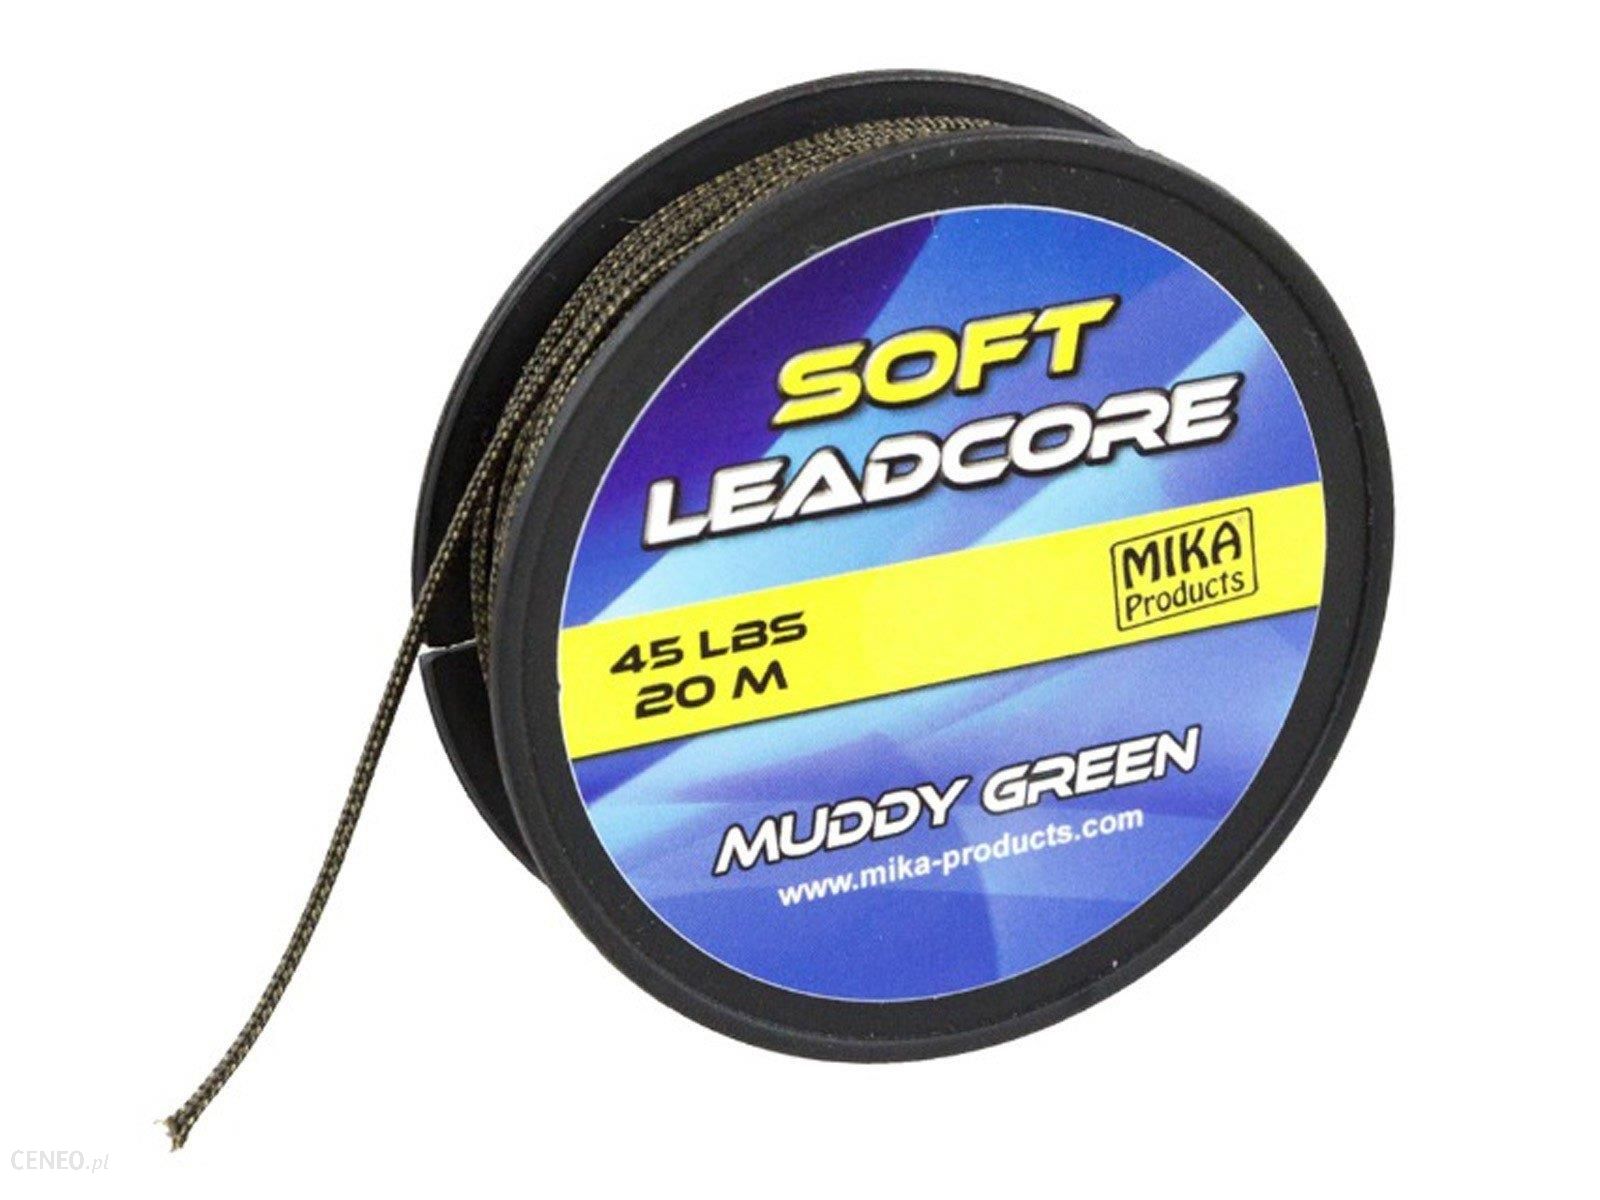 Mika Products Leadcore Soft 45 Lbs 5 M